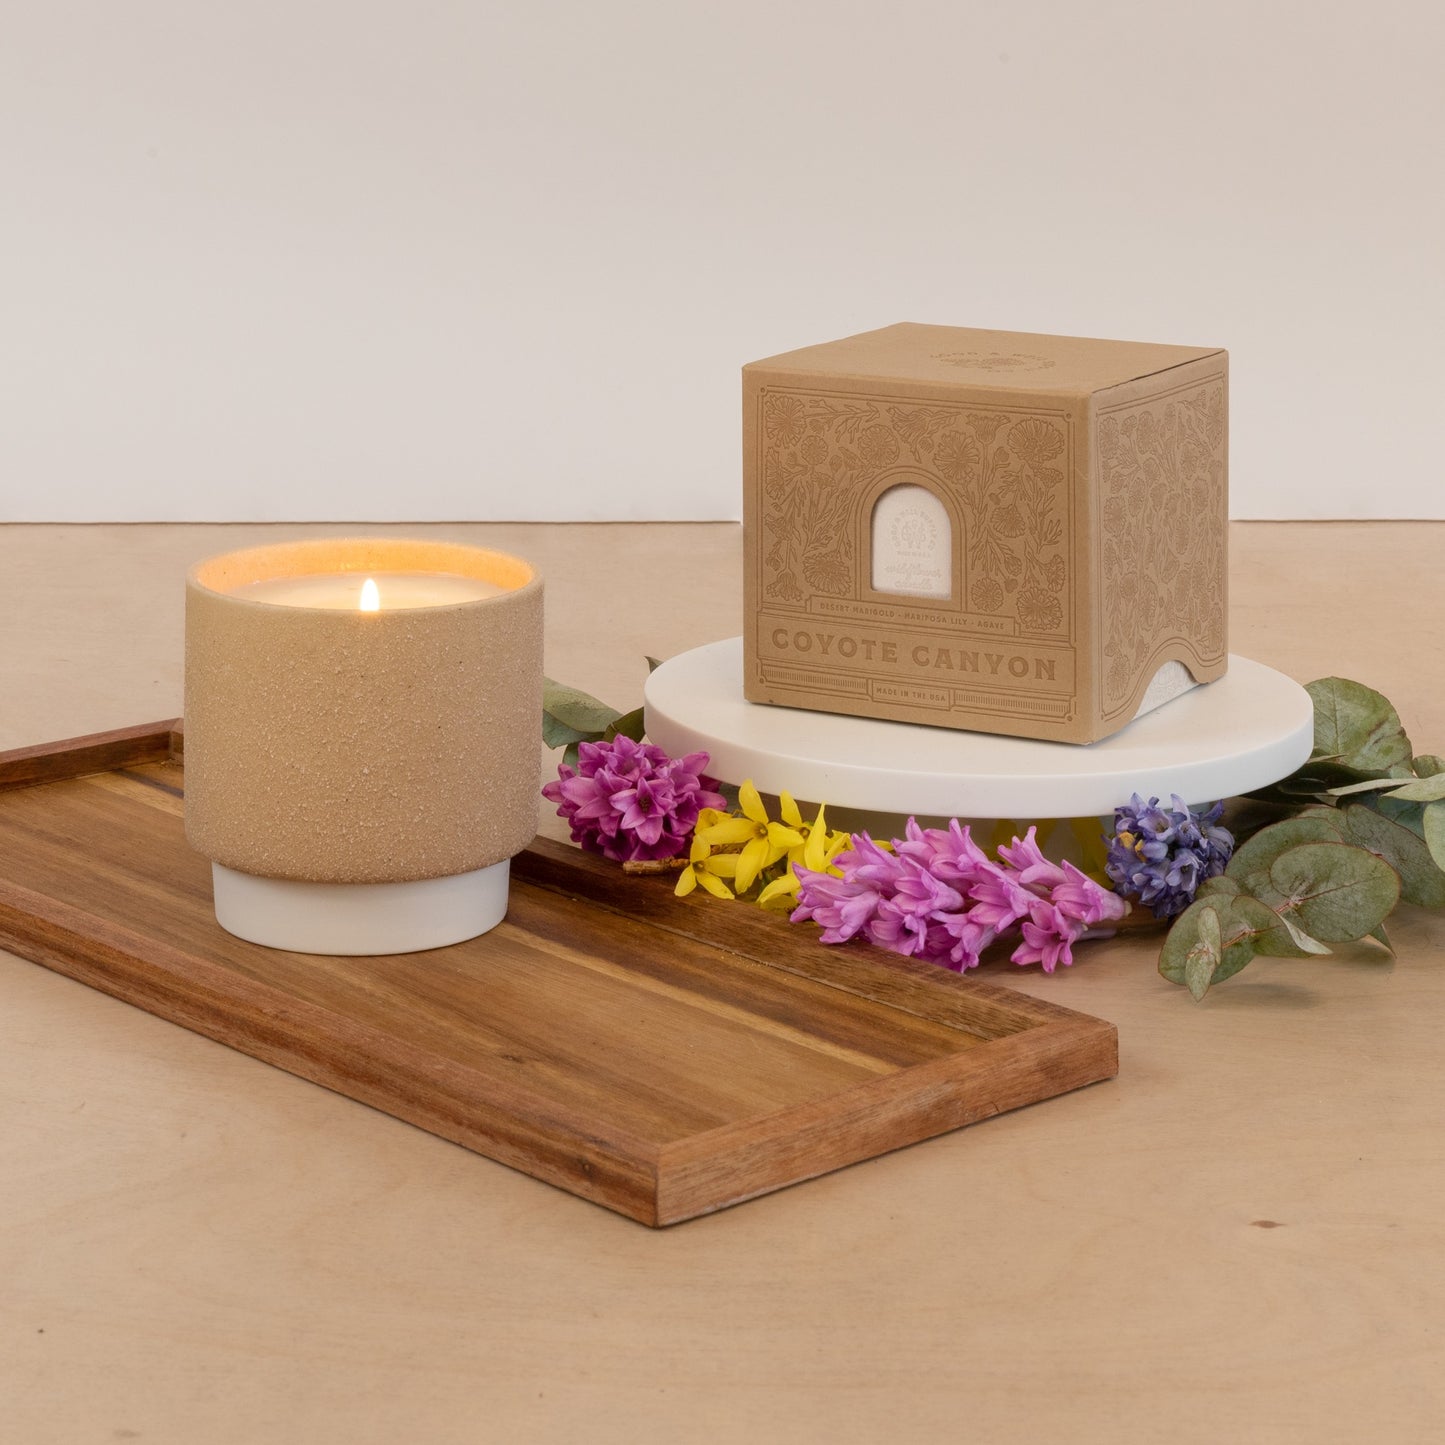 Coyote Canyon Wildflower Candle